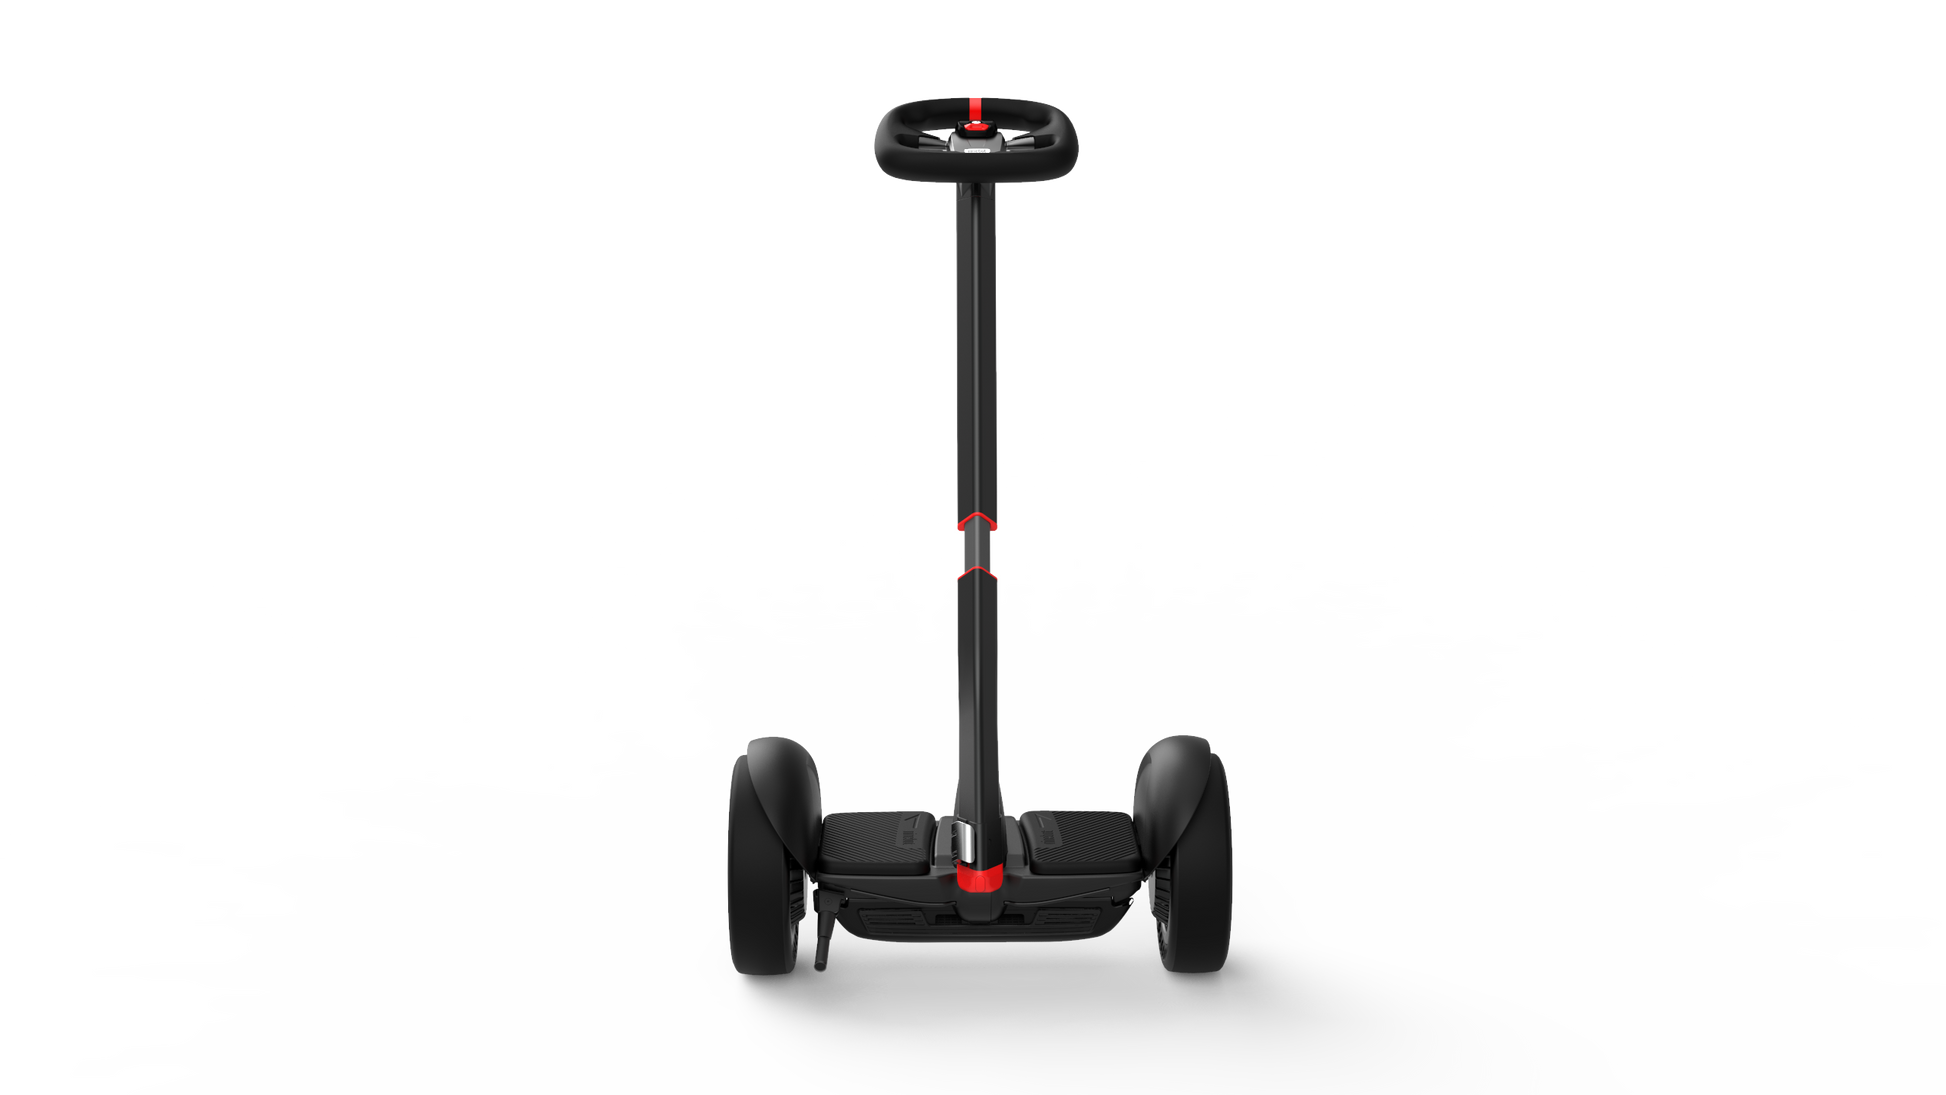 Segway Ninebot S Max self-balancing electric hoverboard scooter with adjustable steering column and steering wheel. Top speed of 20km/h with solid rubber tires. Similar to the Ninebot S and S plus. Back view with kickstand.